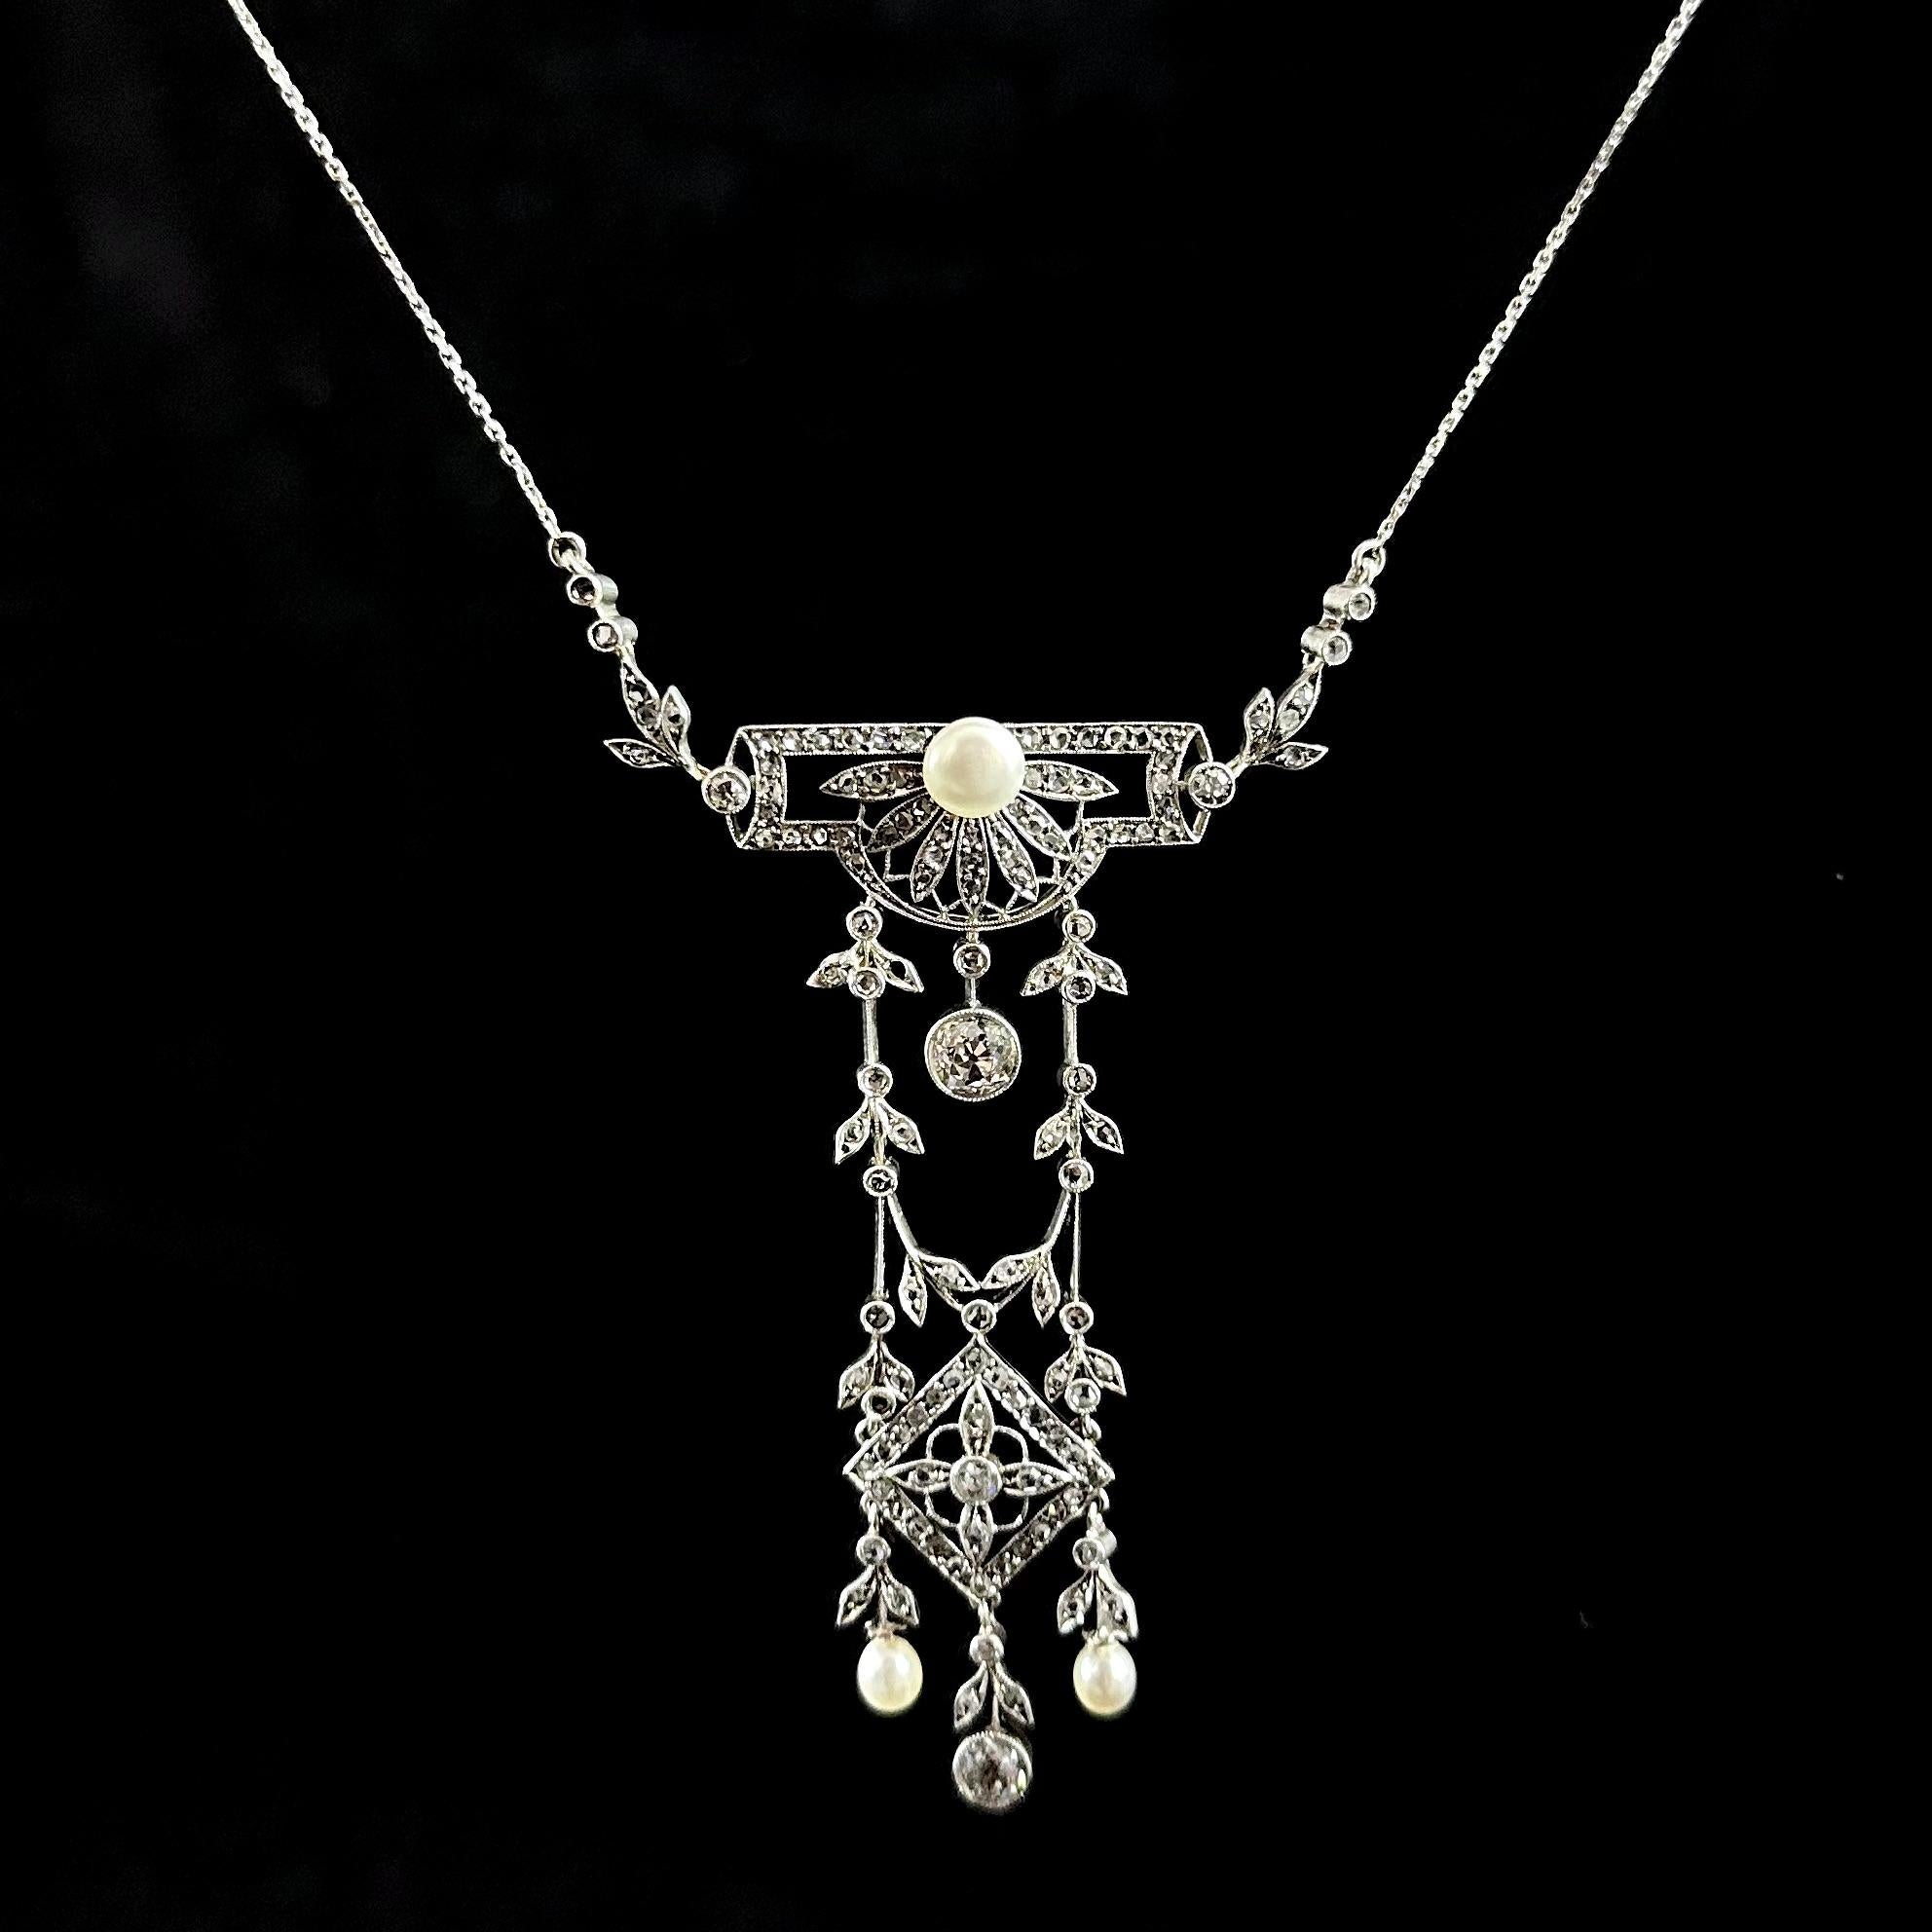 Antique La Belle Époque natural pearl and diamond pendant necklace in platinum and gold, Portuguese, circa 1900. This garland jewel of geometric, floral and foliate motifs is millegrain-set throughout with natural pearls and Old European